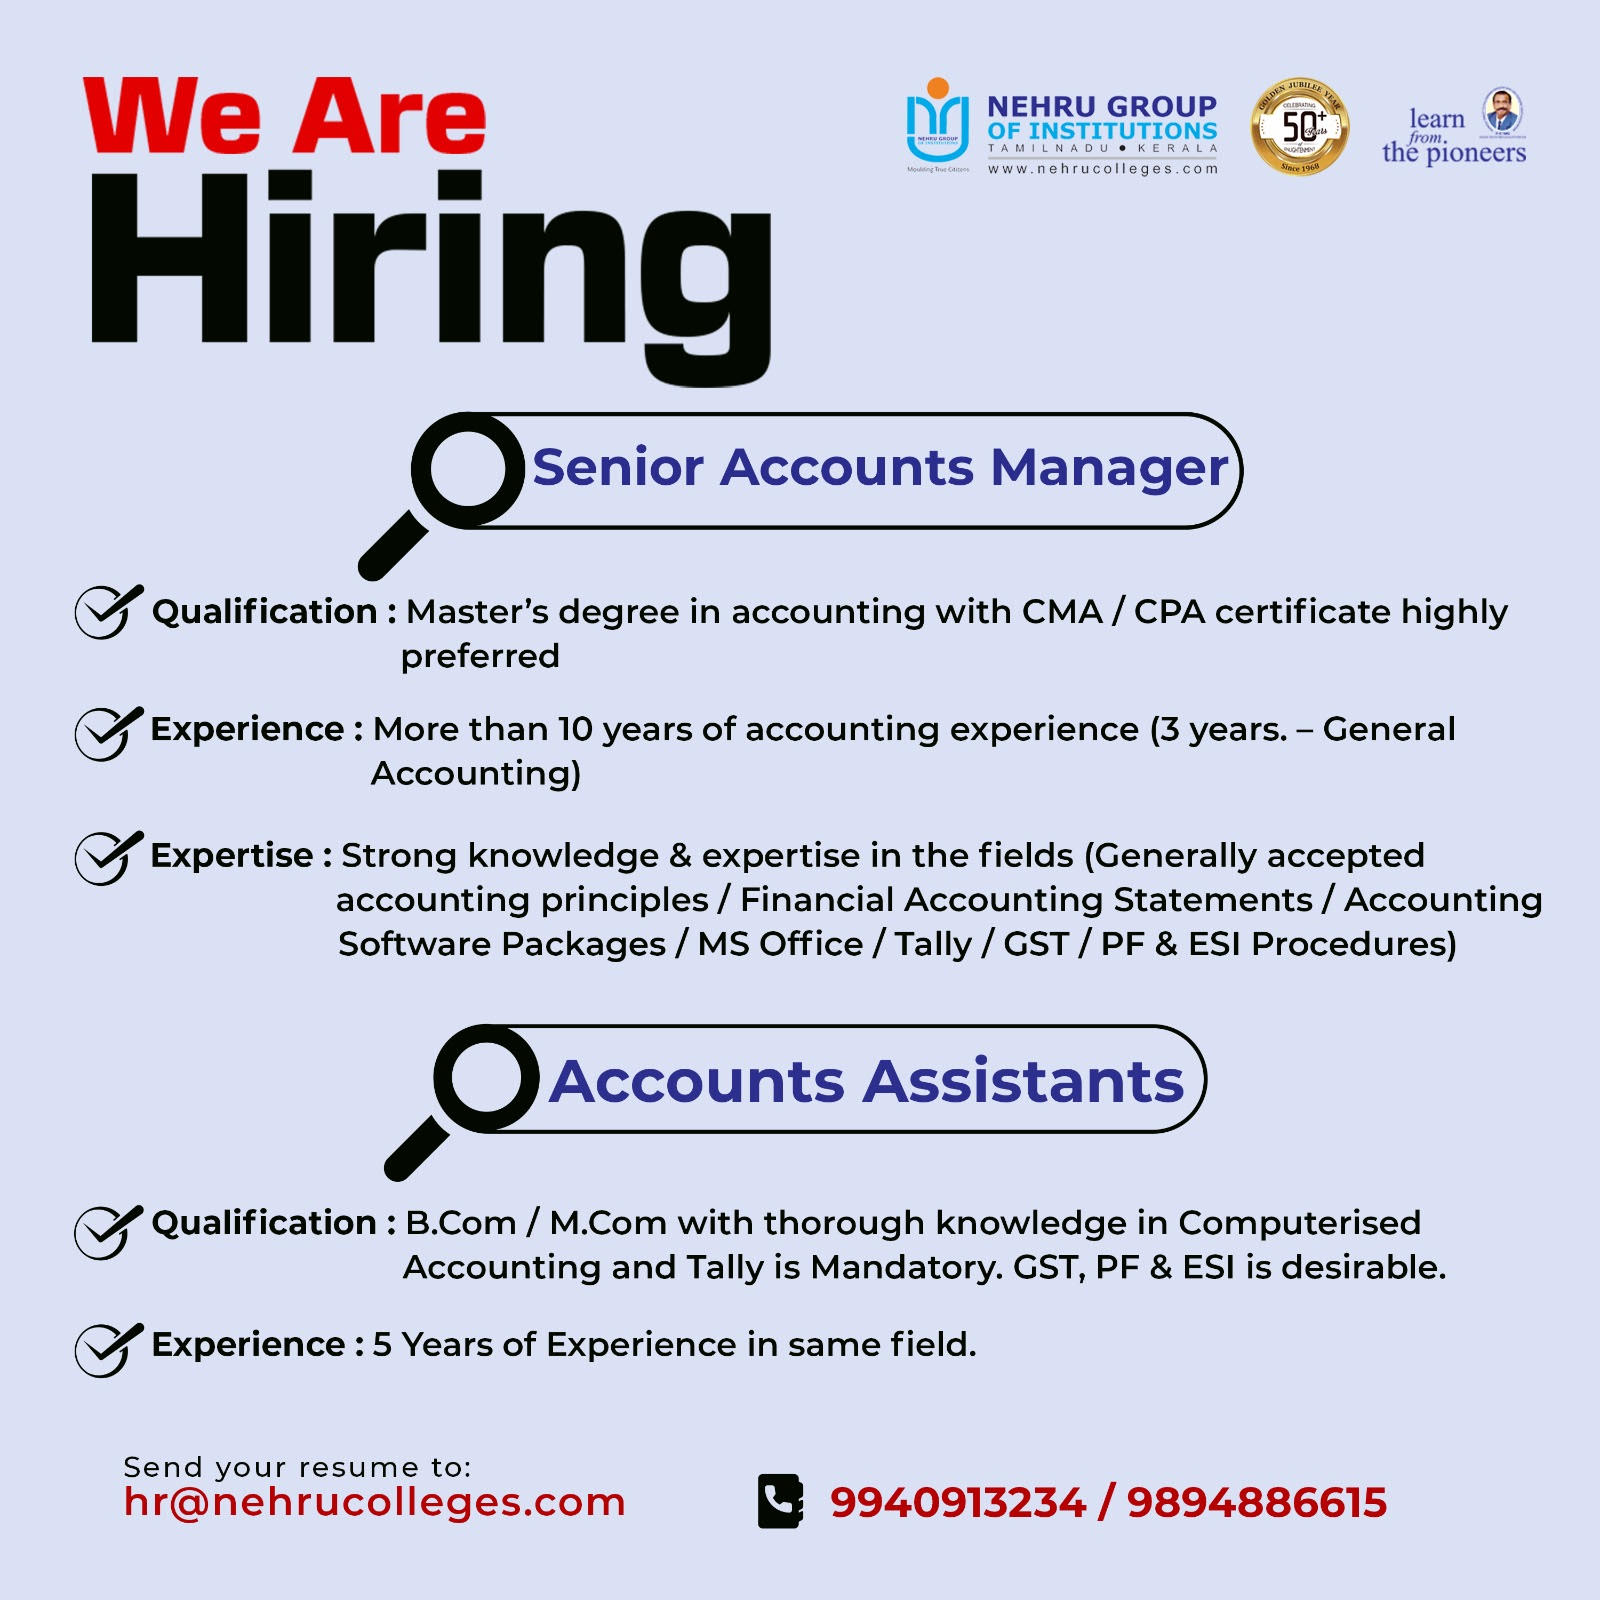 Nehru Group of Institutions Wanted Sr.Accounts Manager/Accounts ...